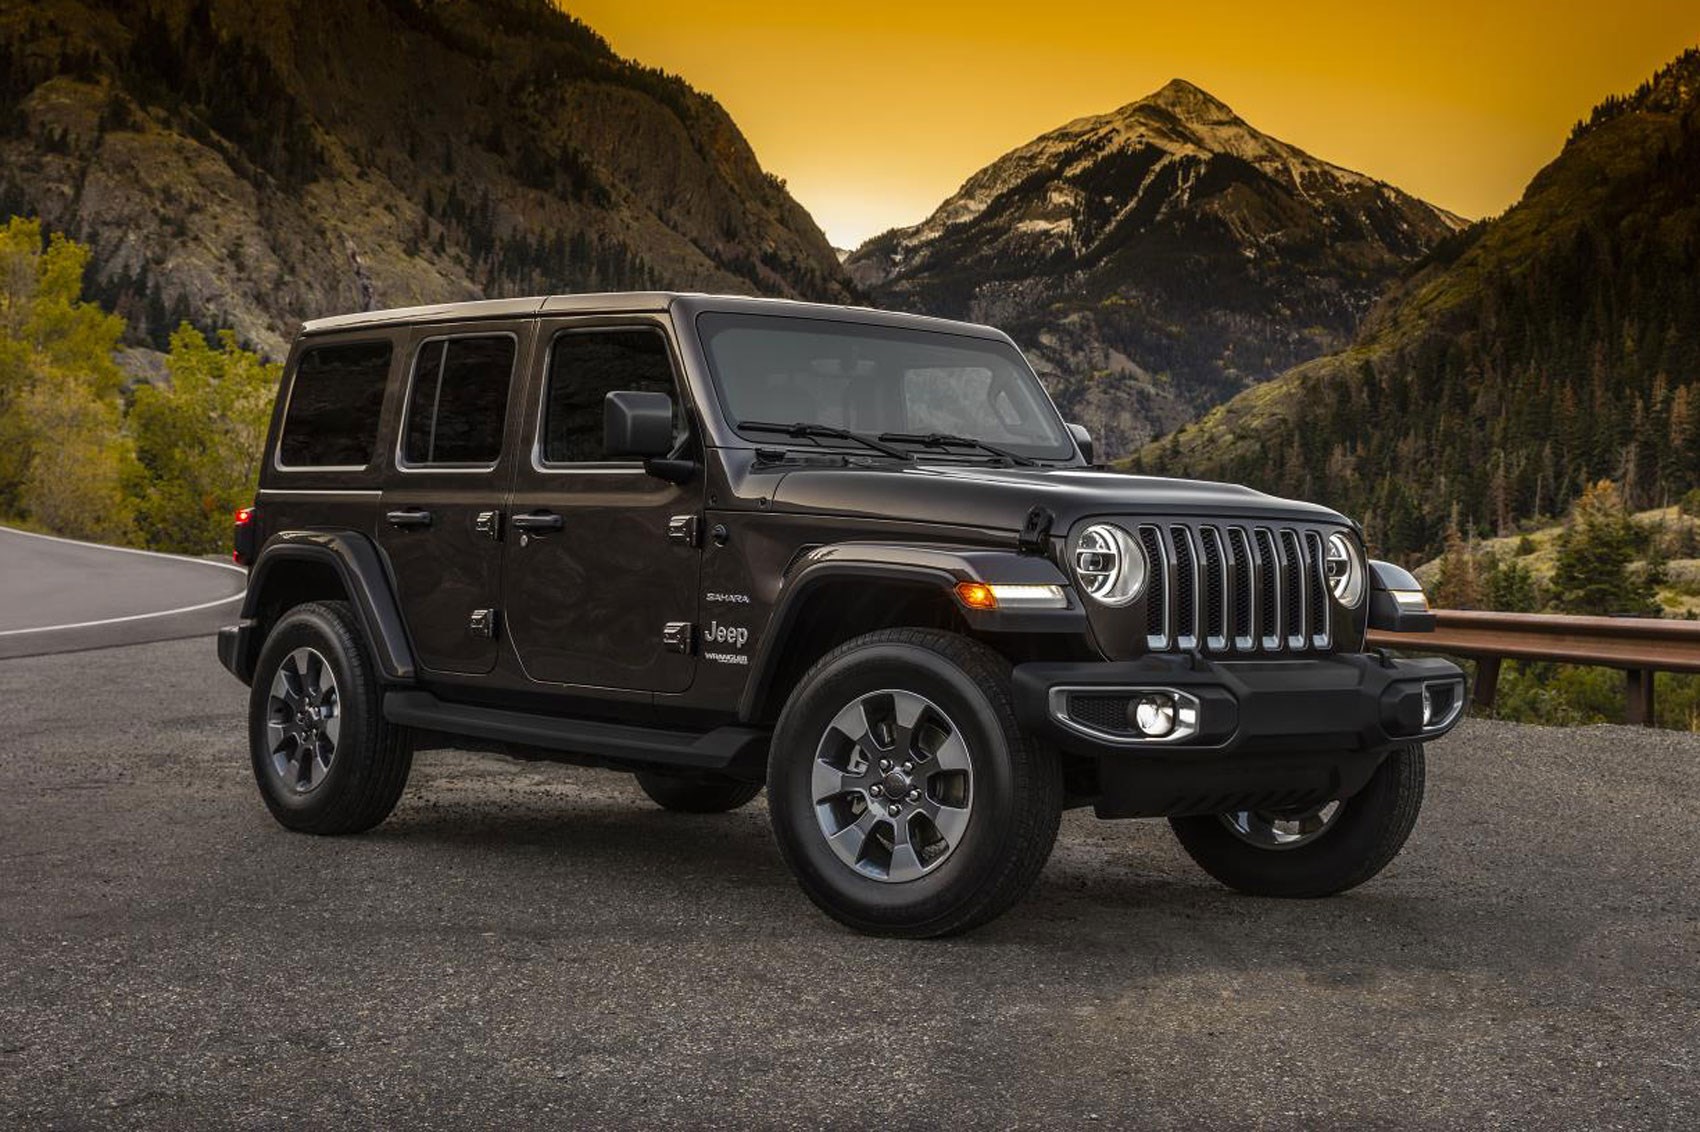 New Jeep Wrangler: the go-anywhere SUV reborn for 2018 arrives in Europe |  CAR Magazine